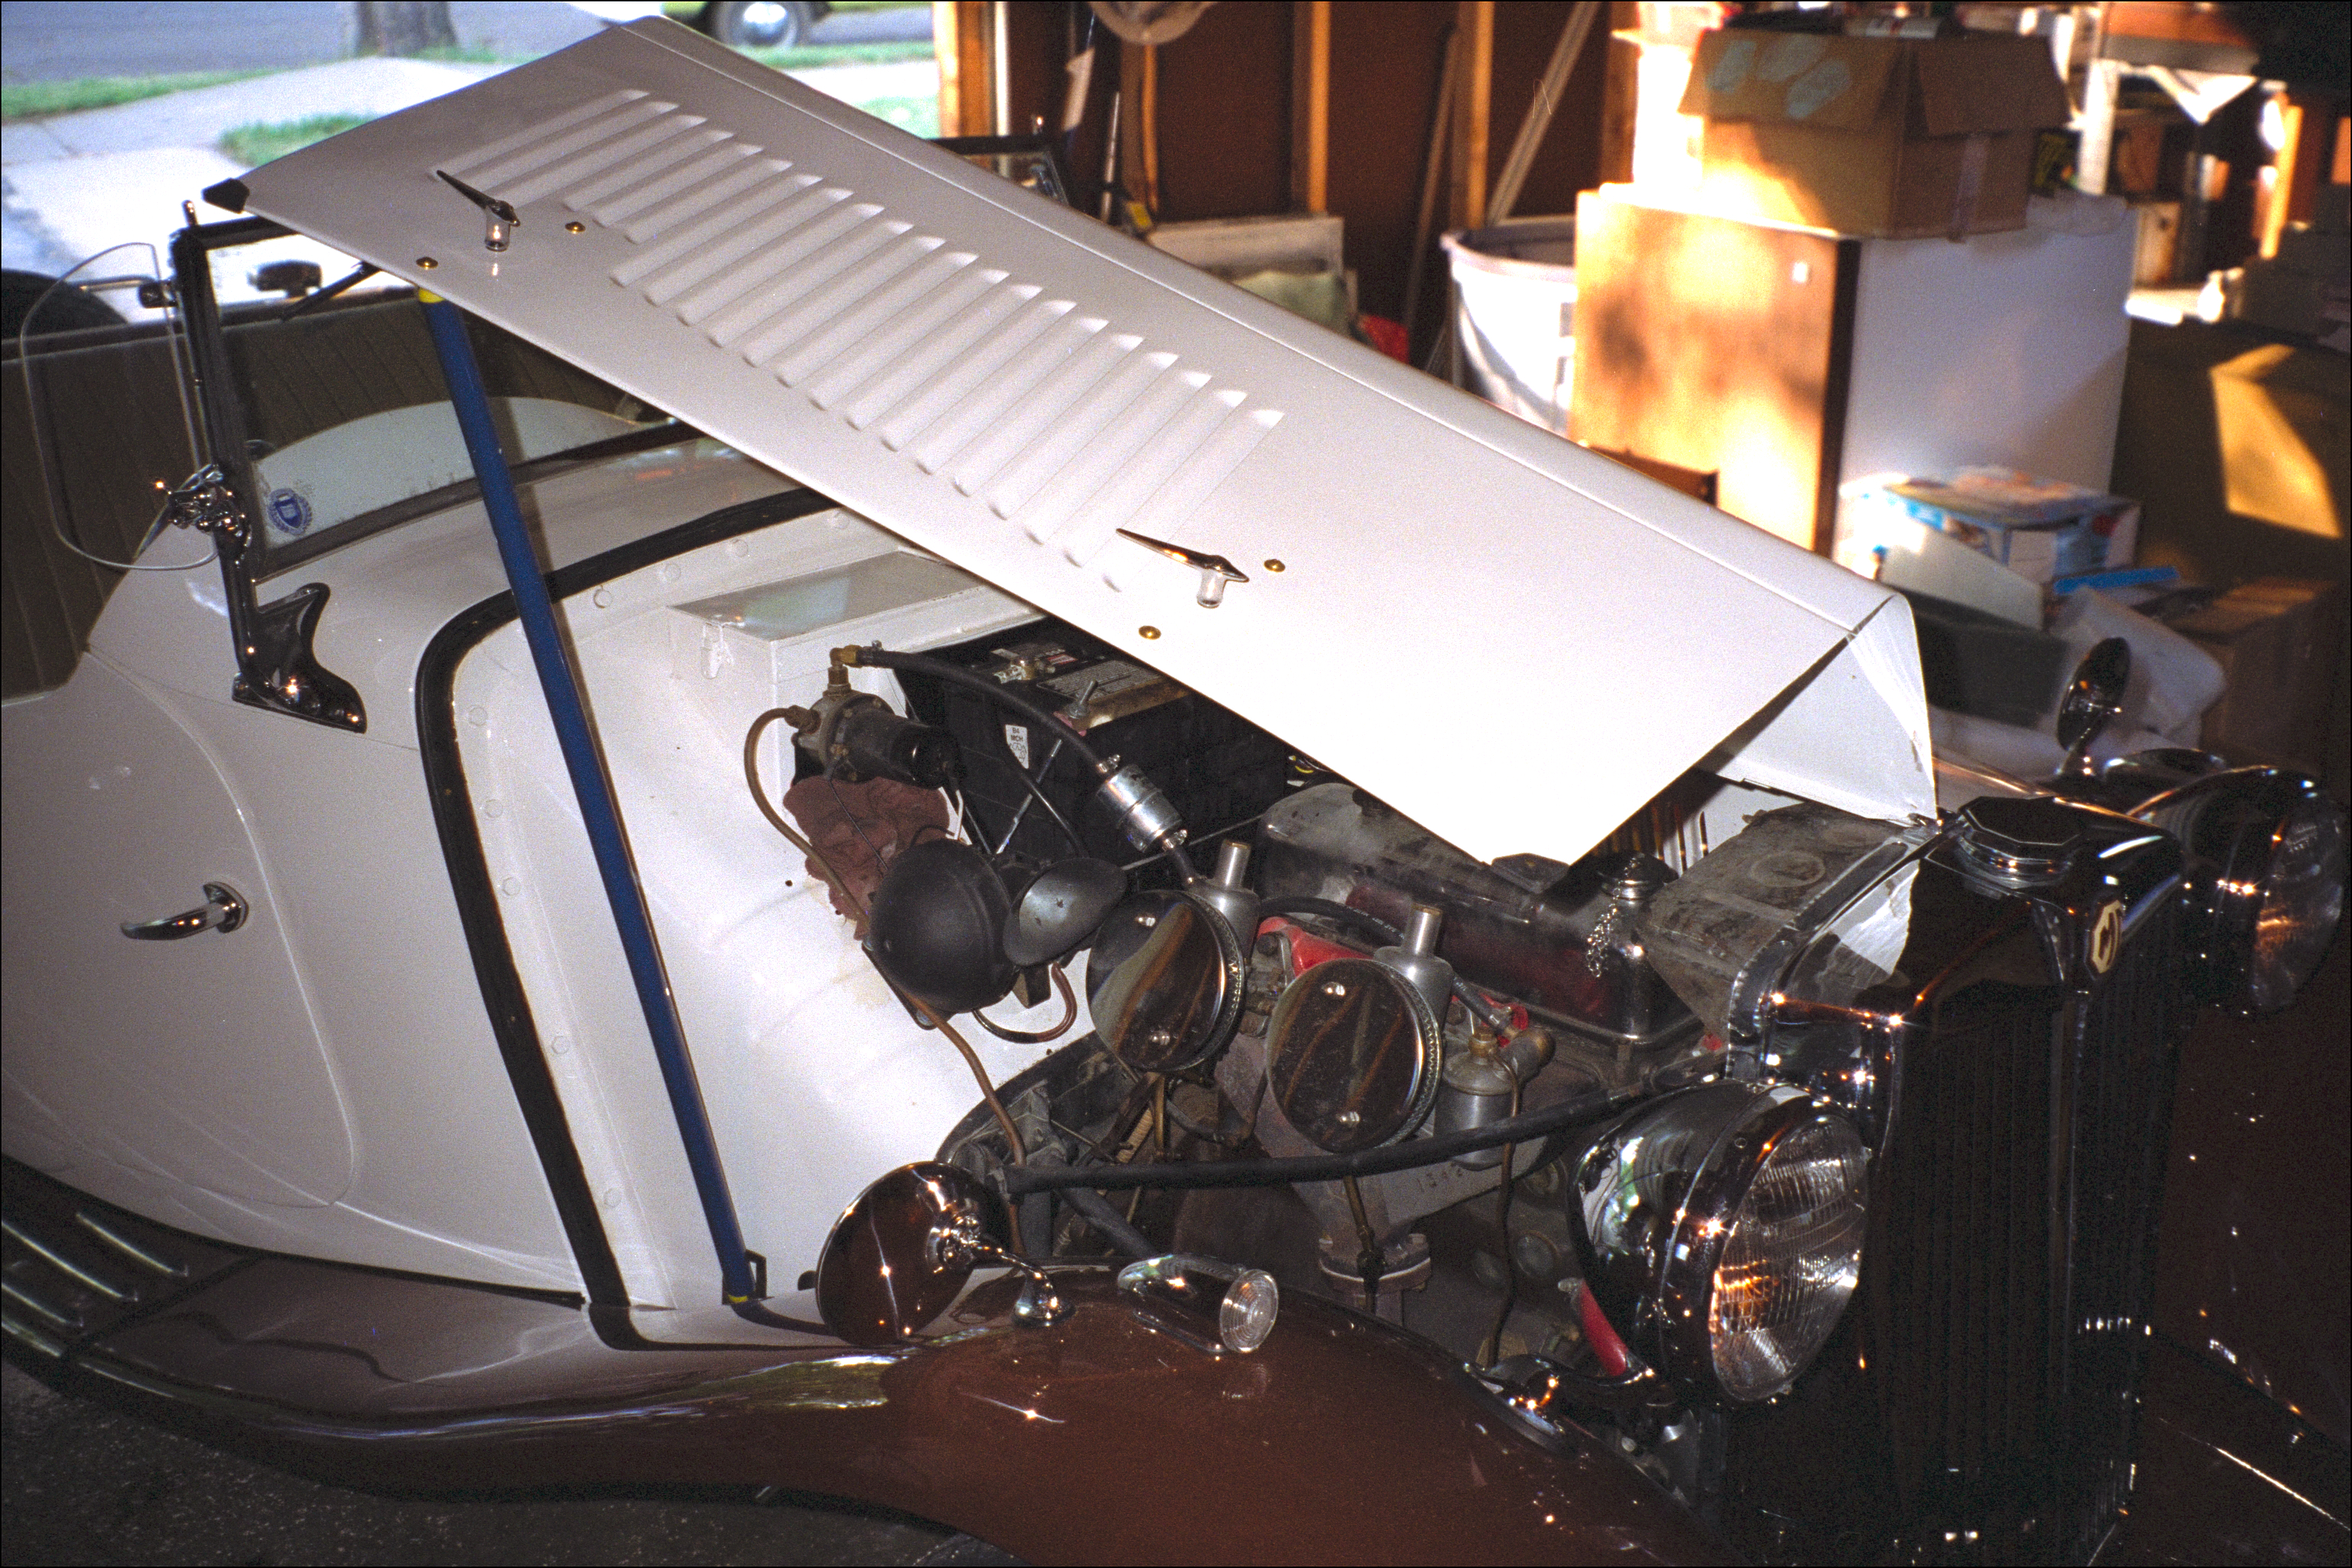 Engine from right, bonnet open